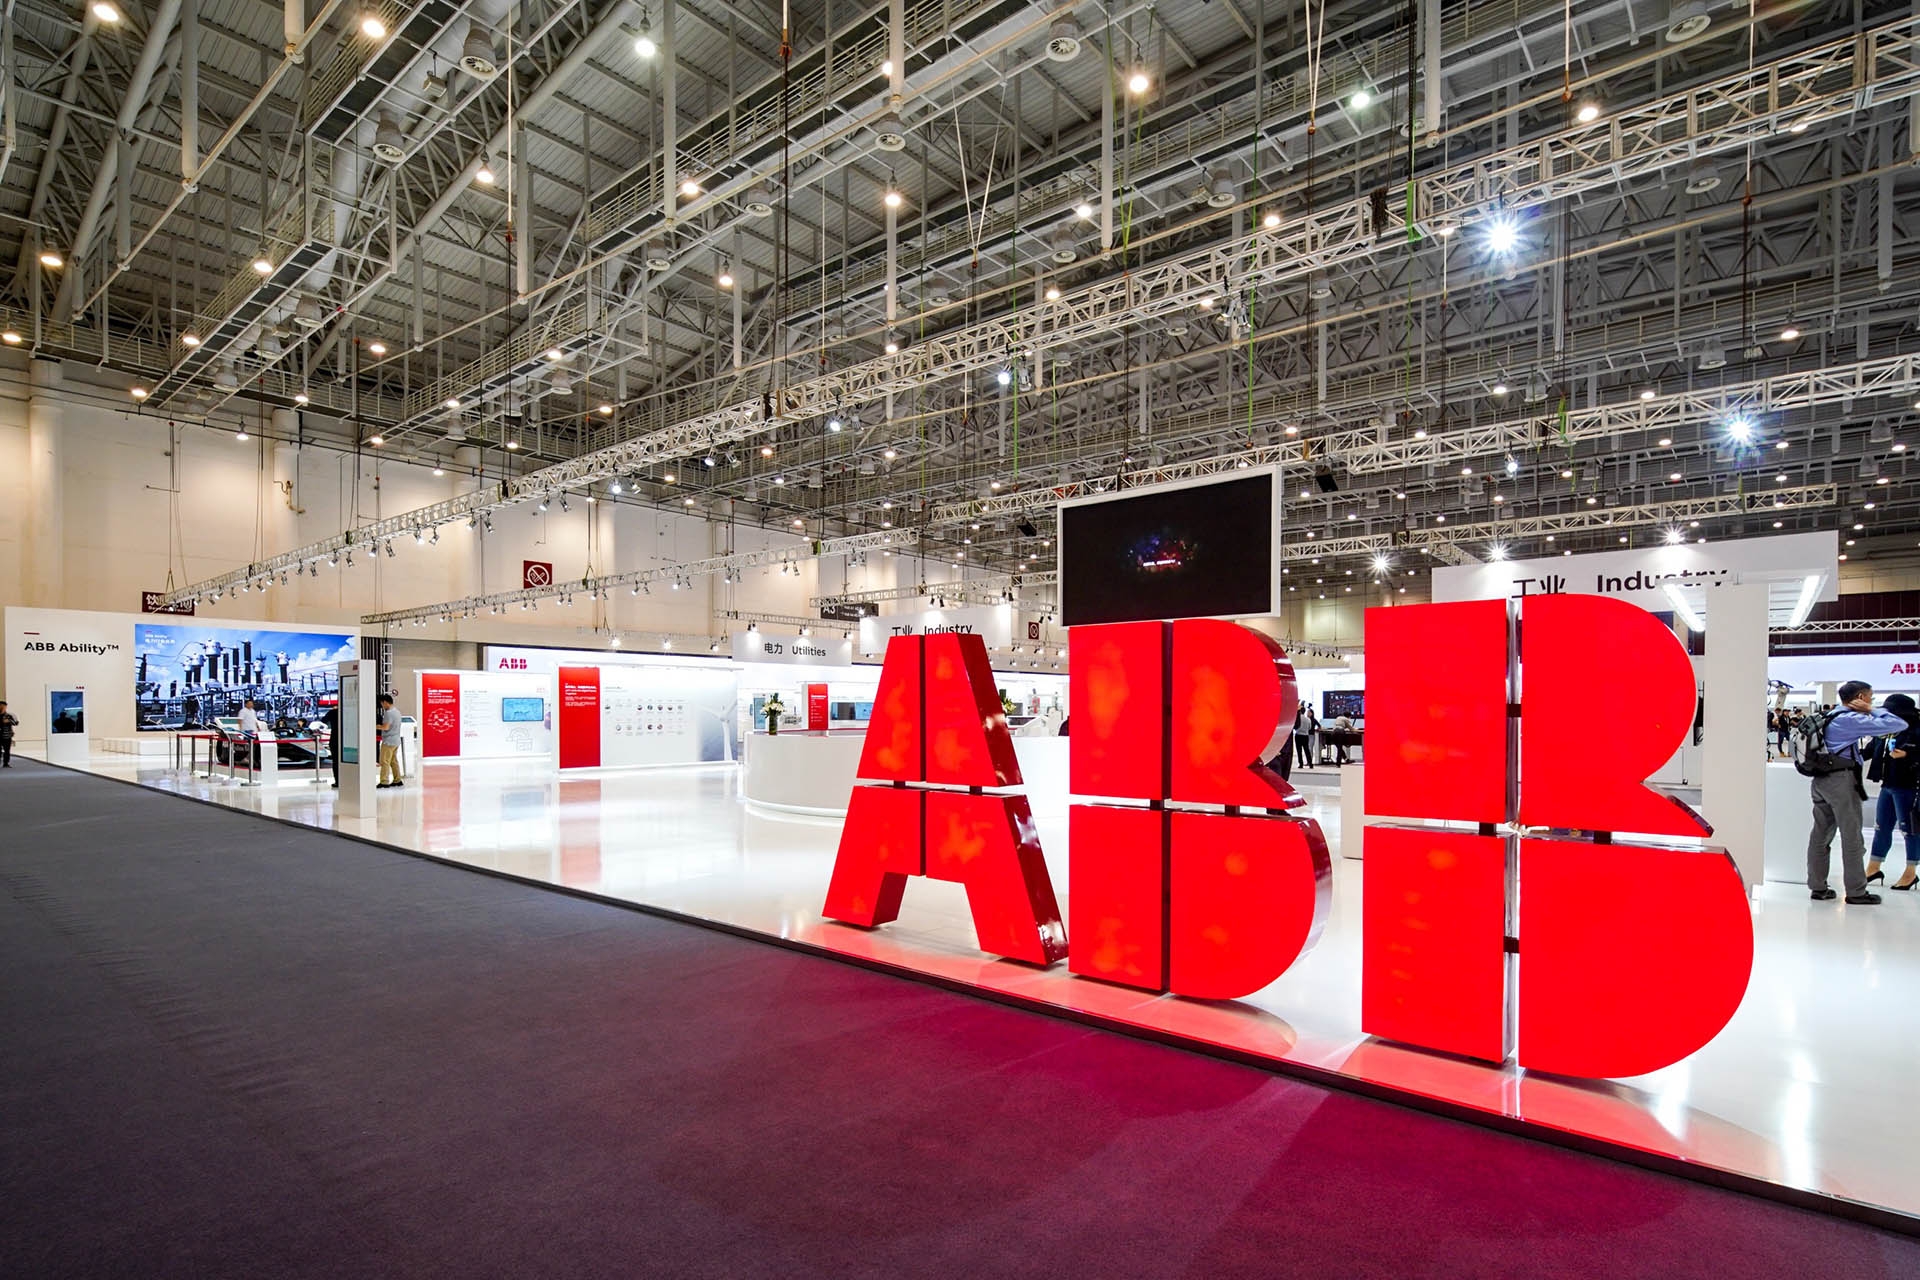 The Energy Efficiency Investment Survey 2022, commissioned by ABB, addressed 2,294 companies in 13 countries, ranging in size from 500 to 5,000 employees or more.